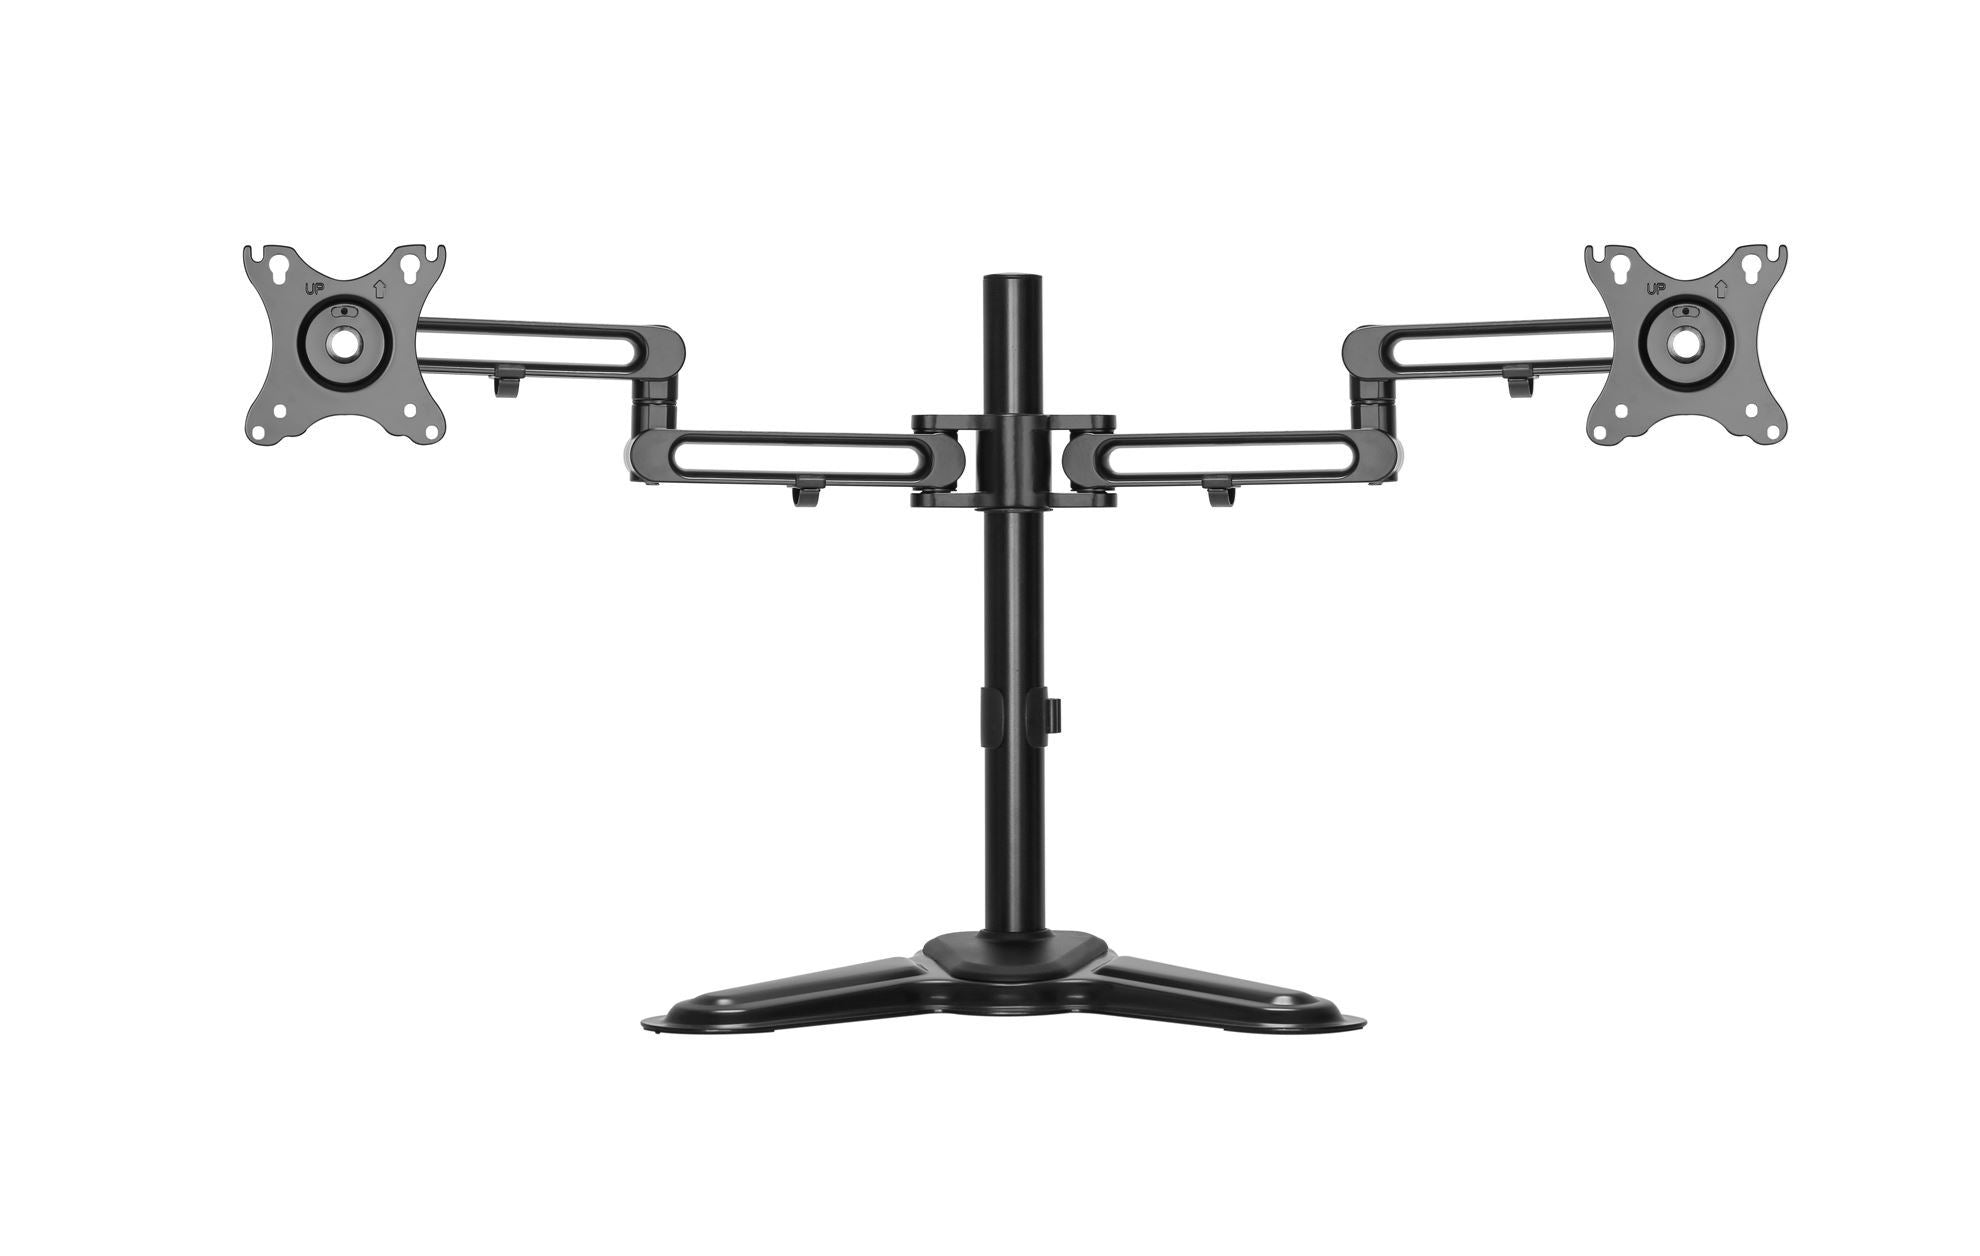 BRATECK 17''-32'' Dual Screen Articulating Monitor Stand. Free-Tilting Design, Sturdy Steel Base, 360 Rotary VESA Plate